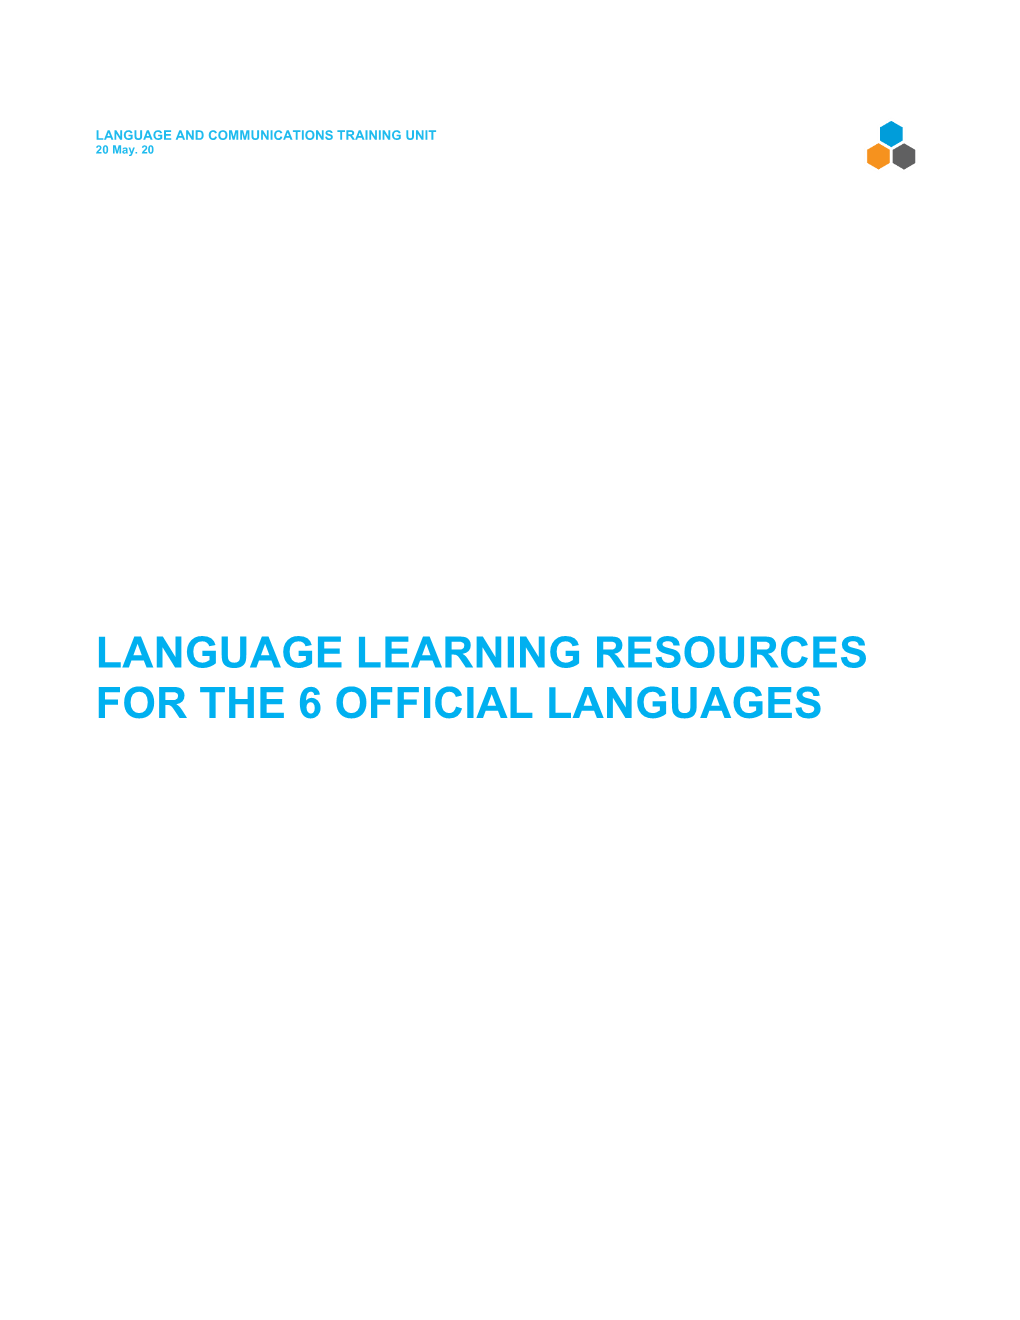 Language Learning Resources for the 6 Official Languages